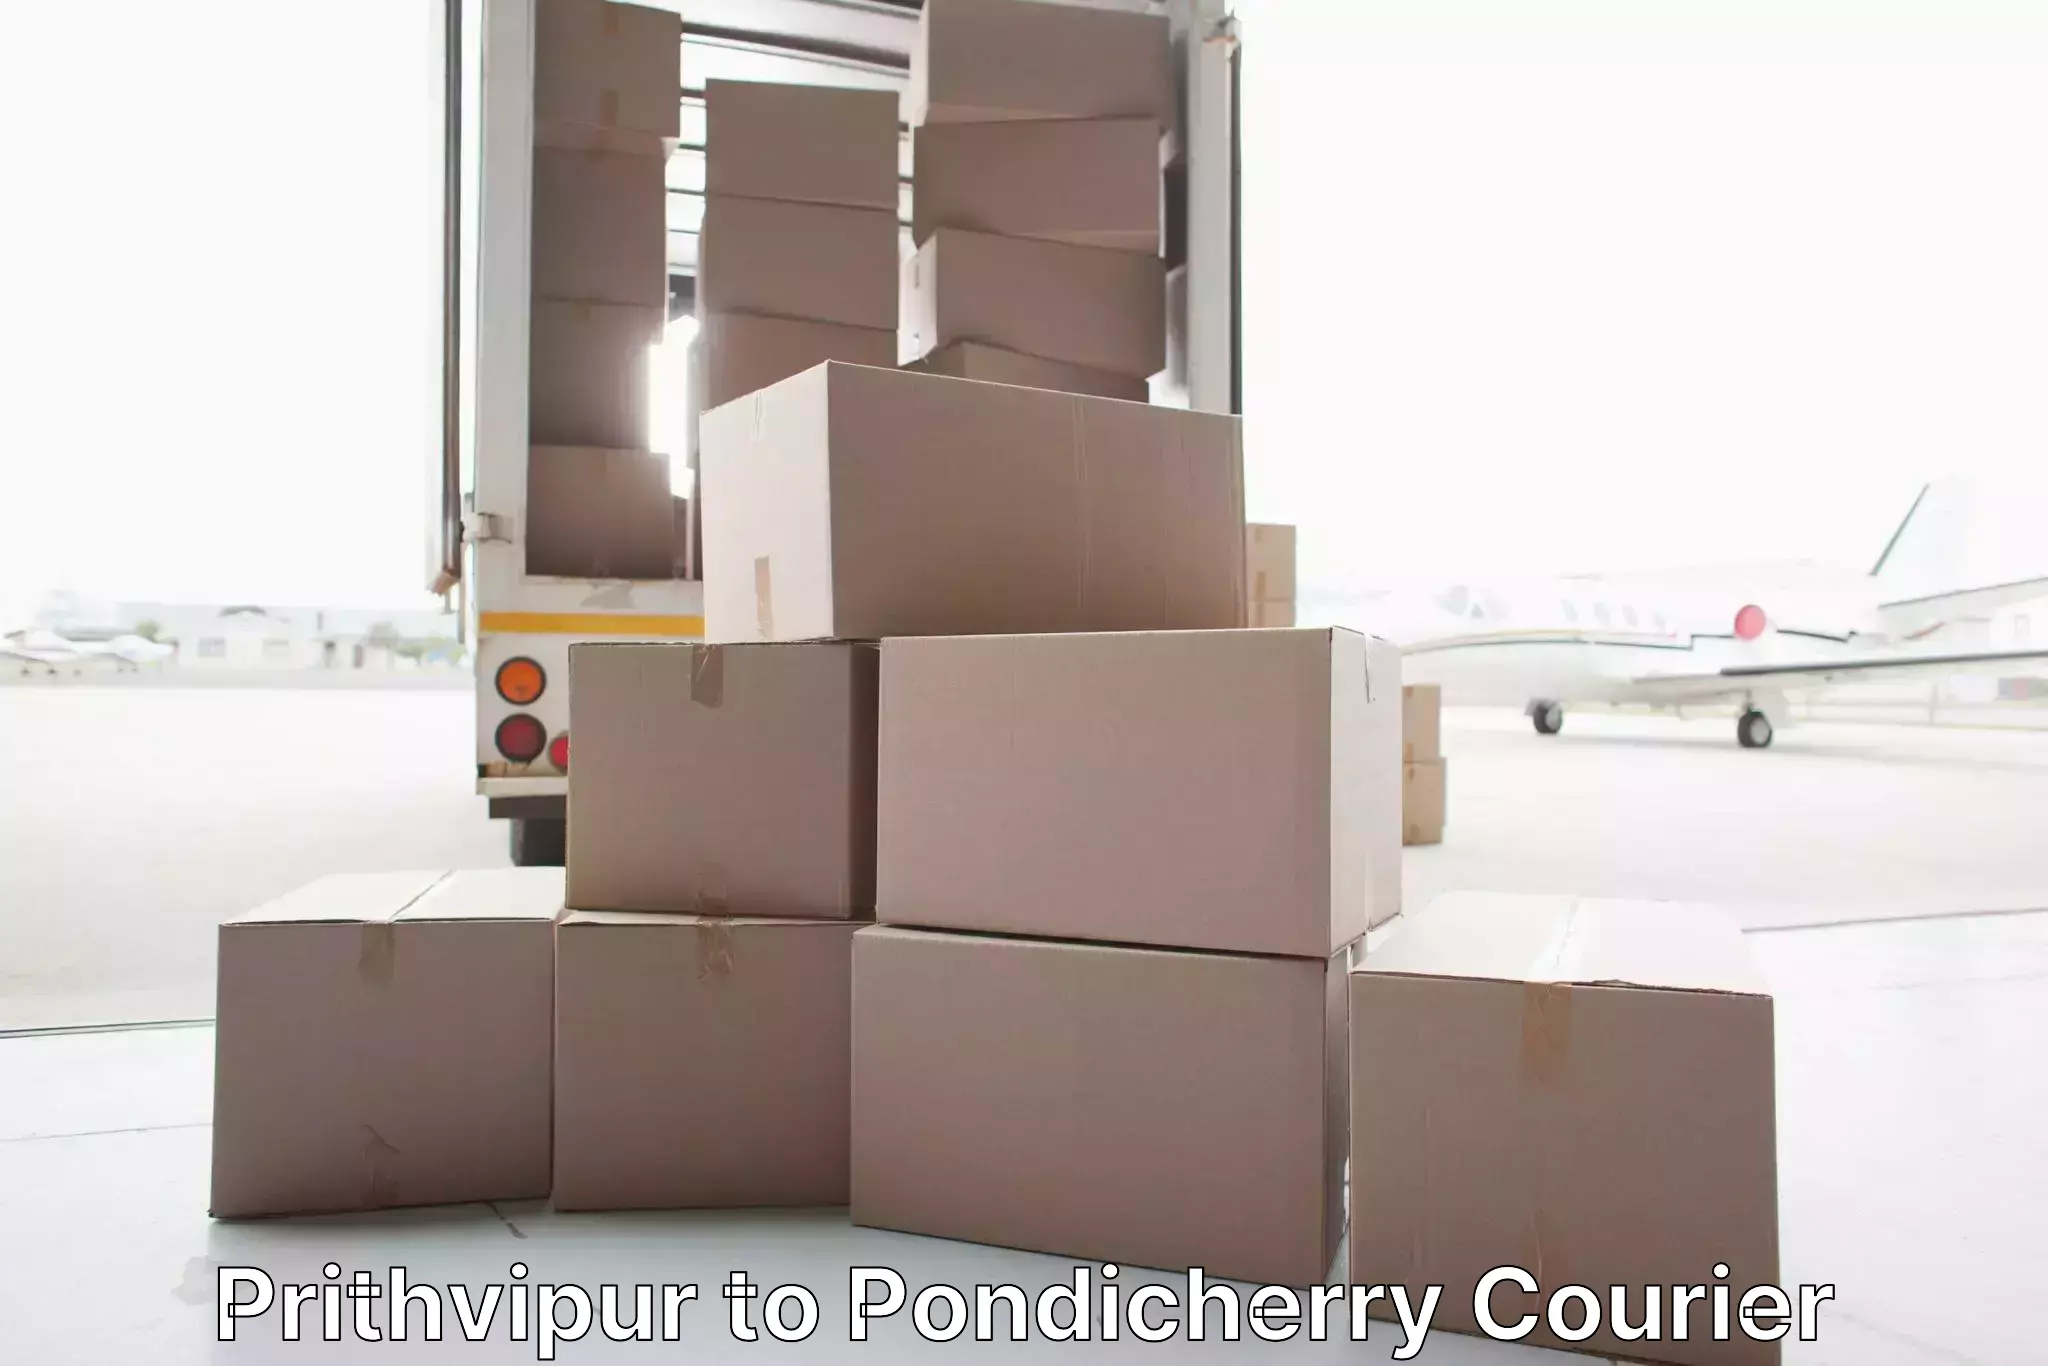 Home moving specialists Prithvipur to Pondicherry University